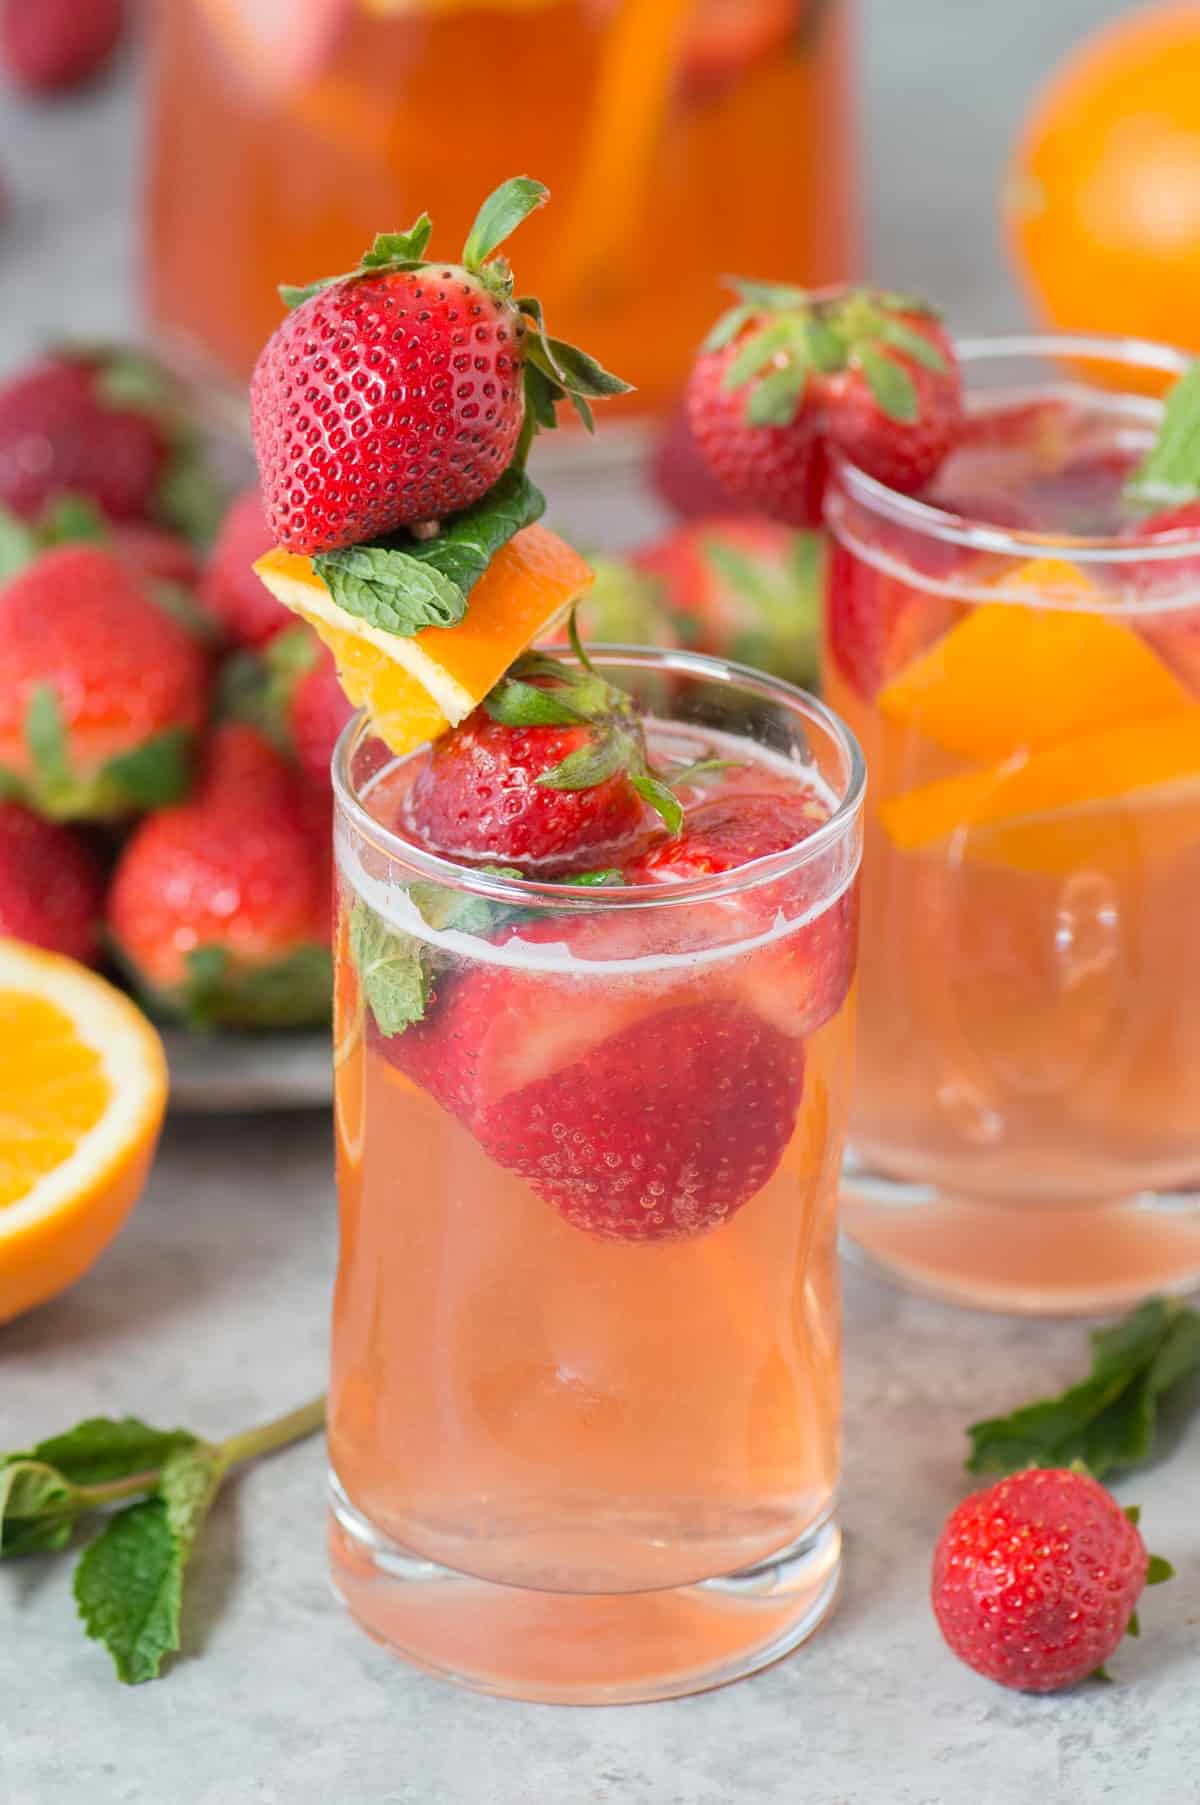 strawberry sangria in clear glass with skewer of strawberries, oranges and mint as garnish